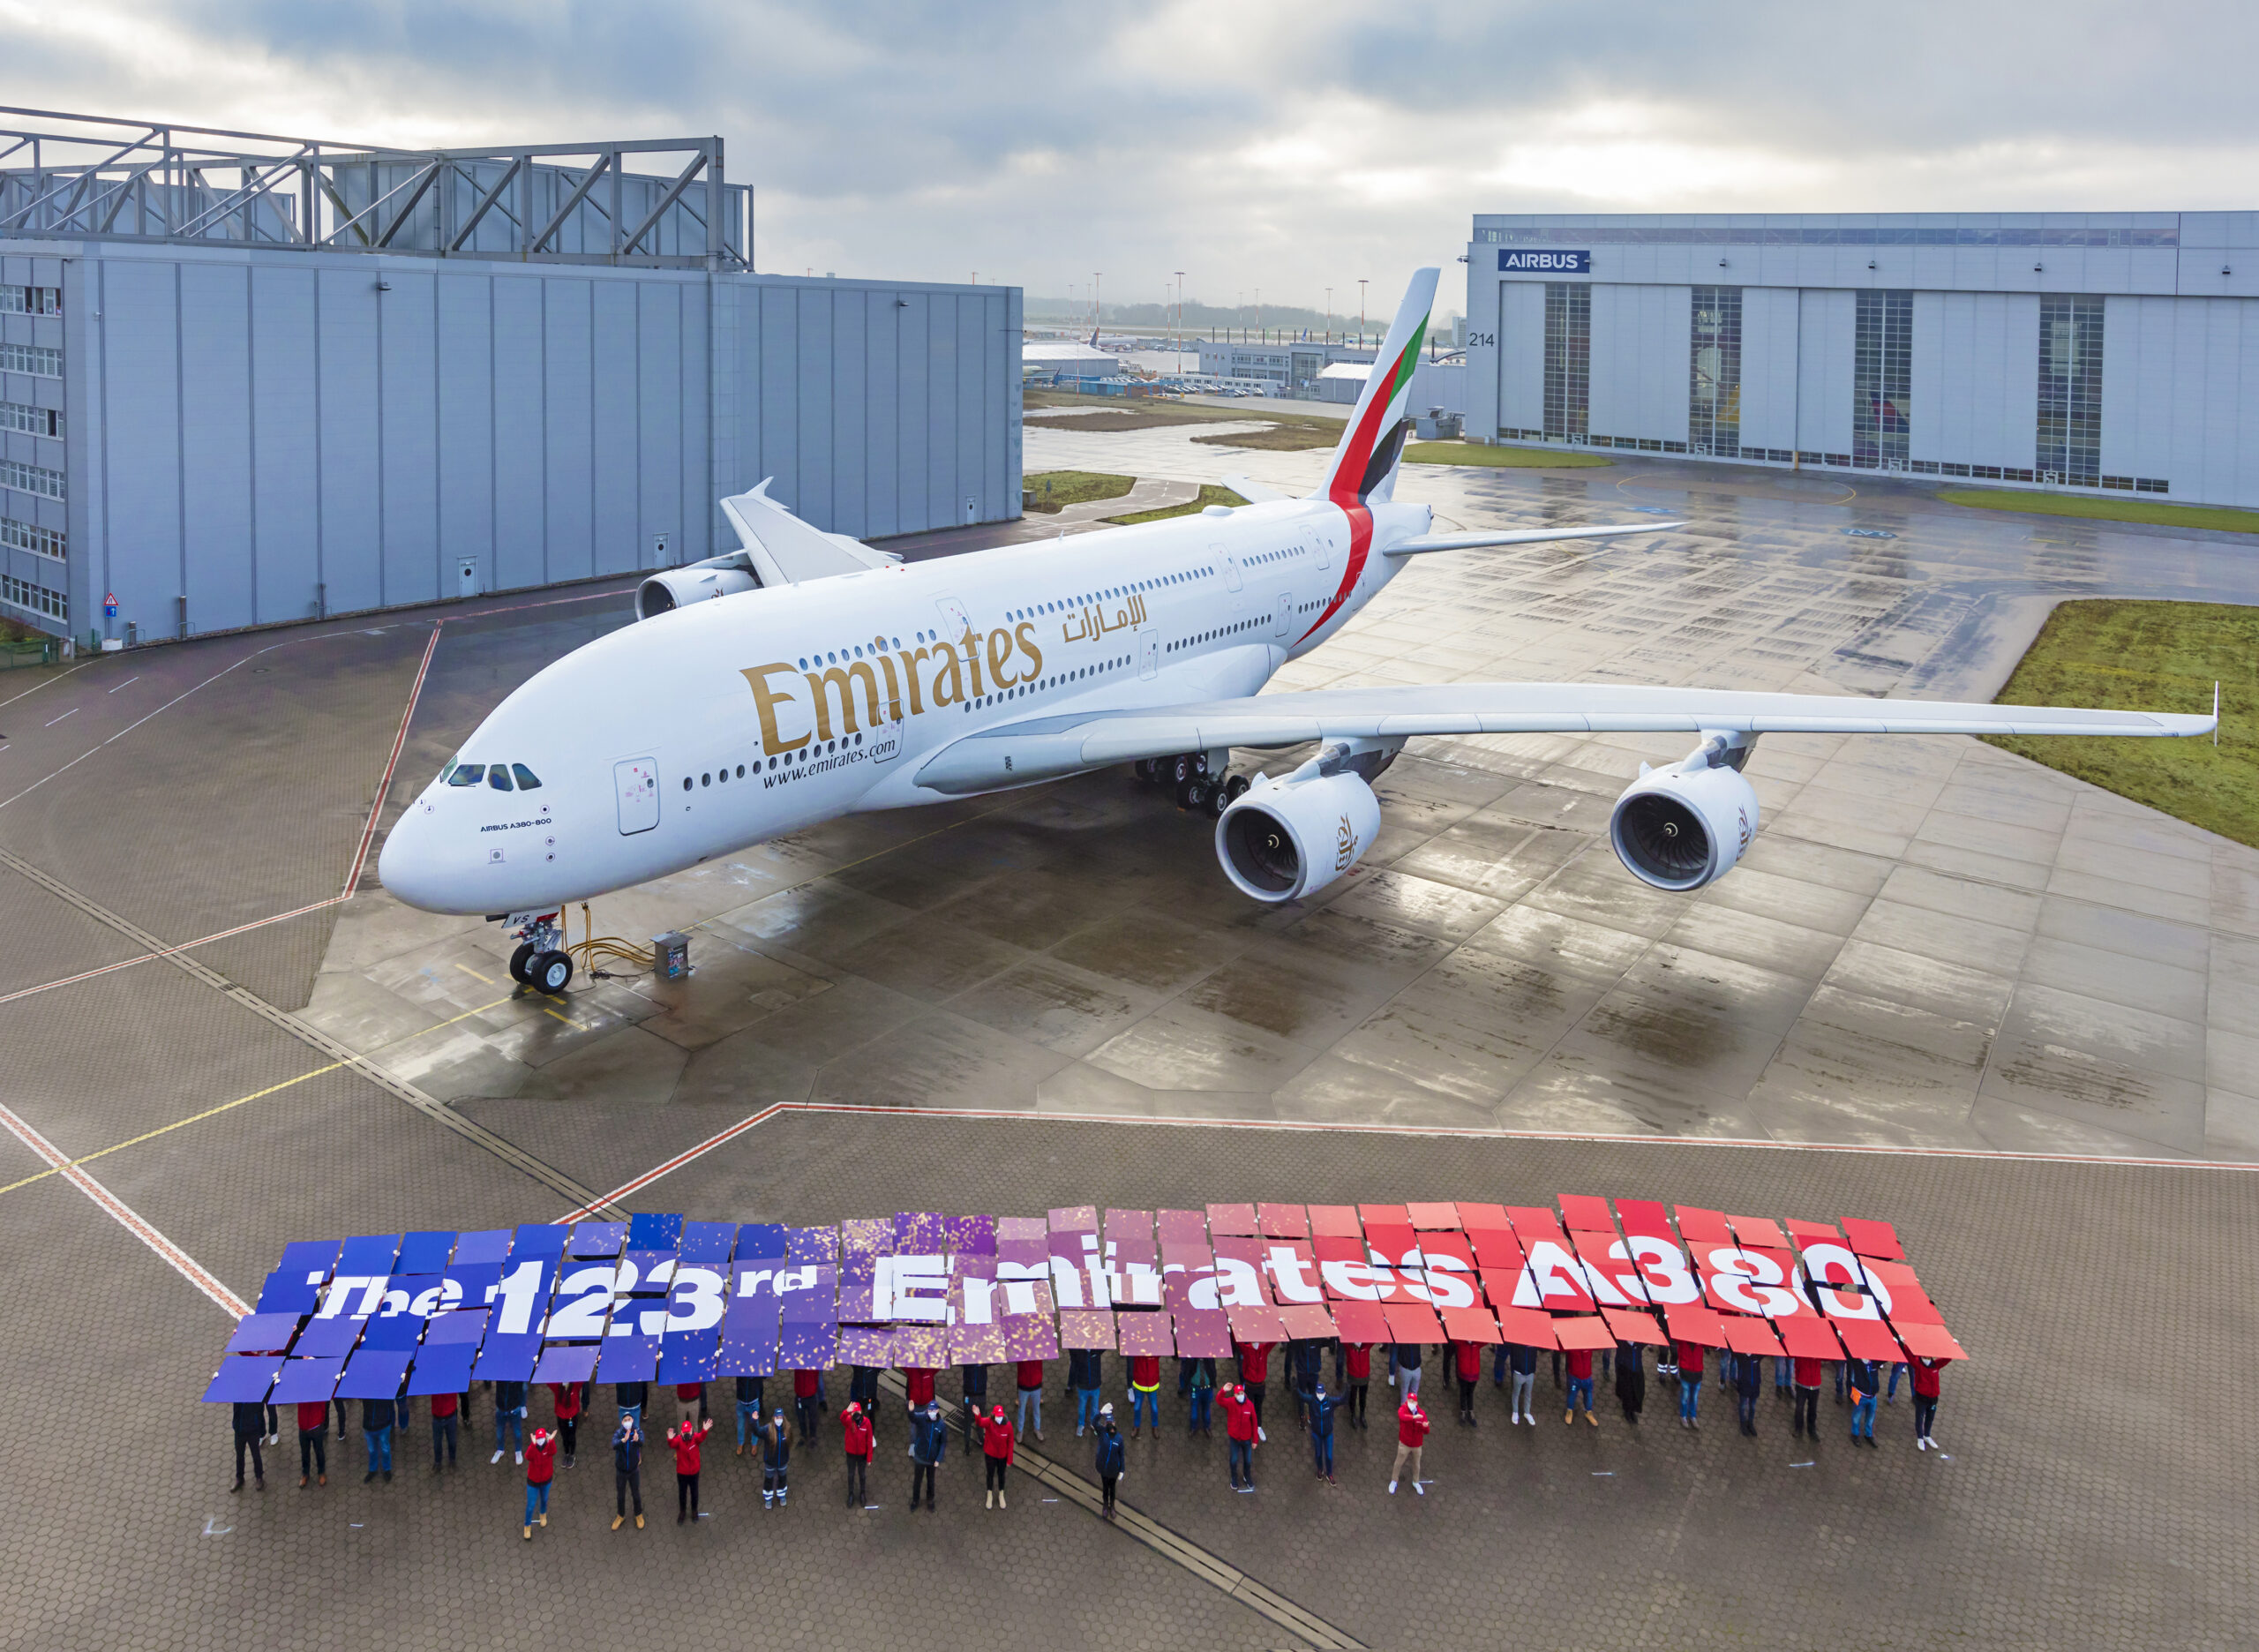 The Last A380 Delivered to Emirates